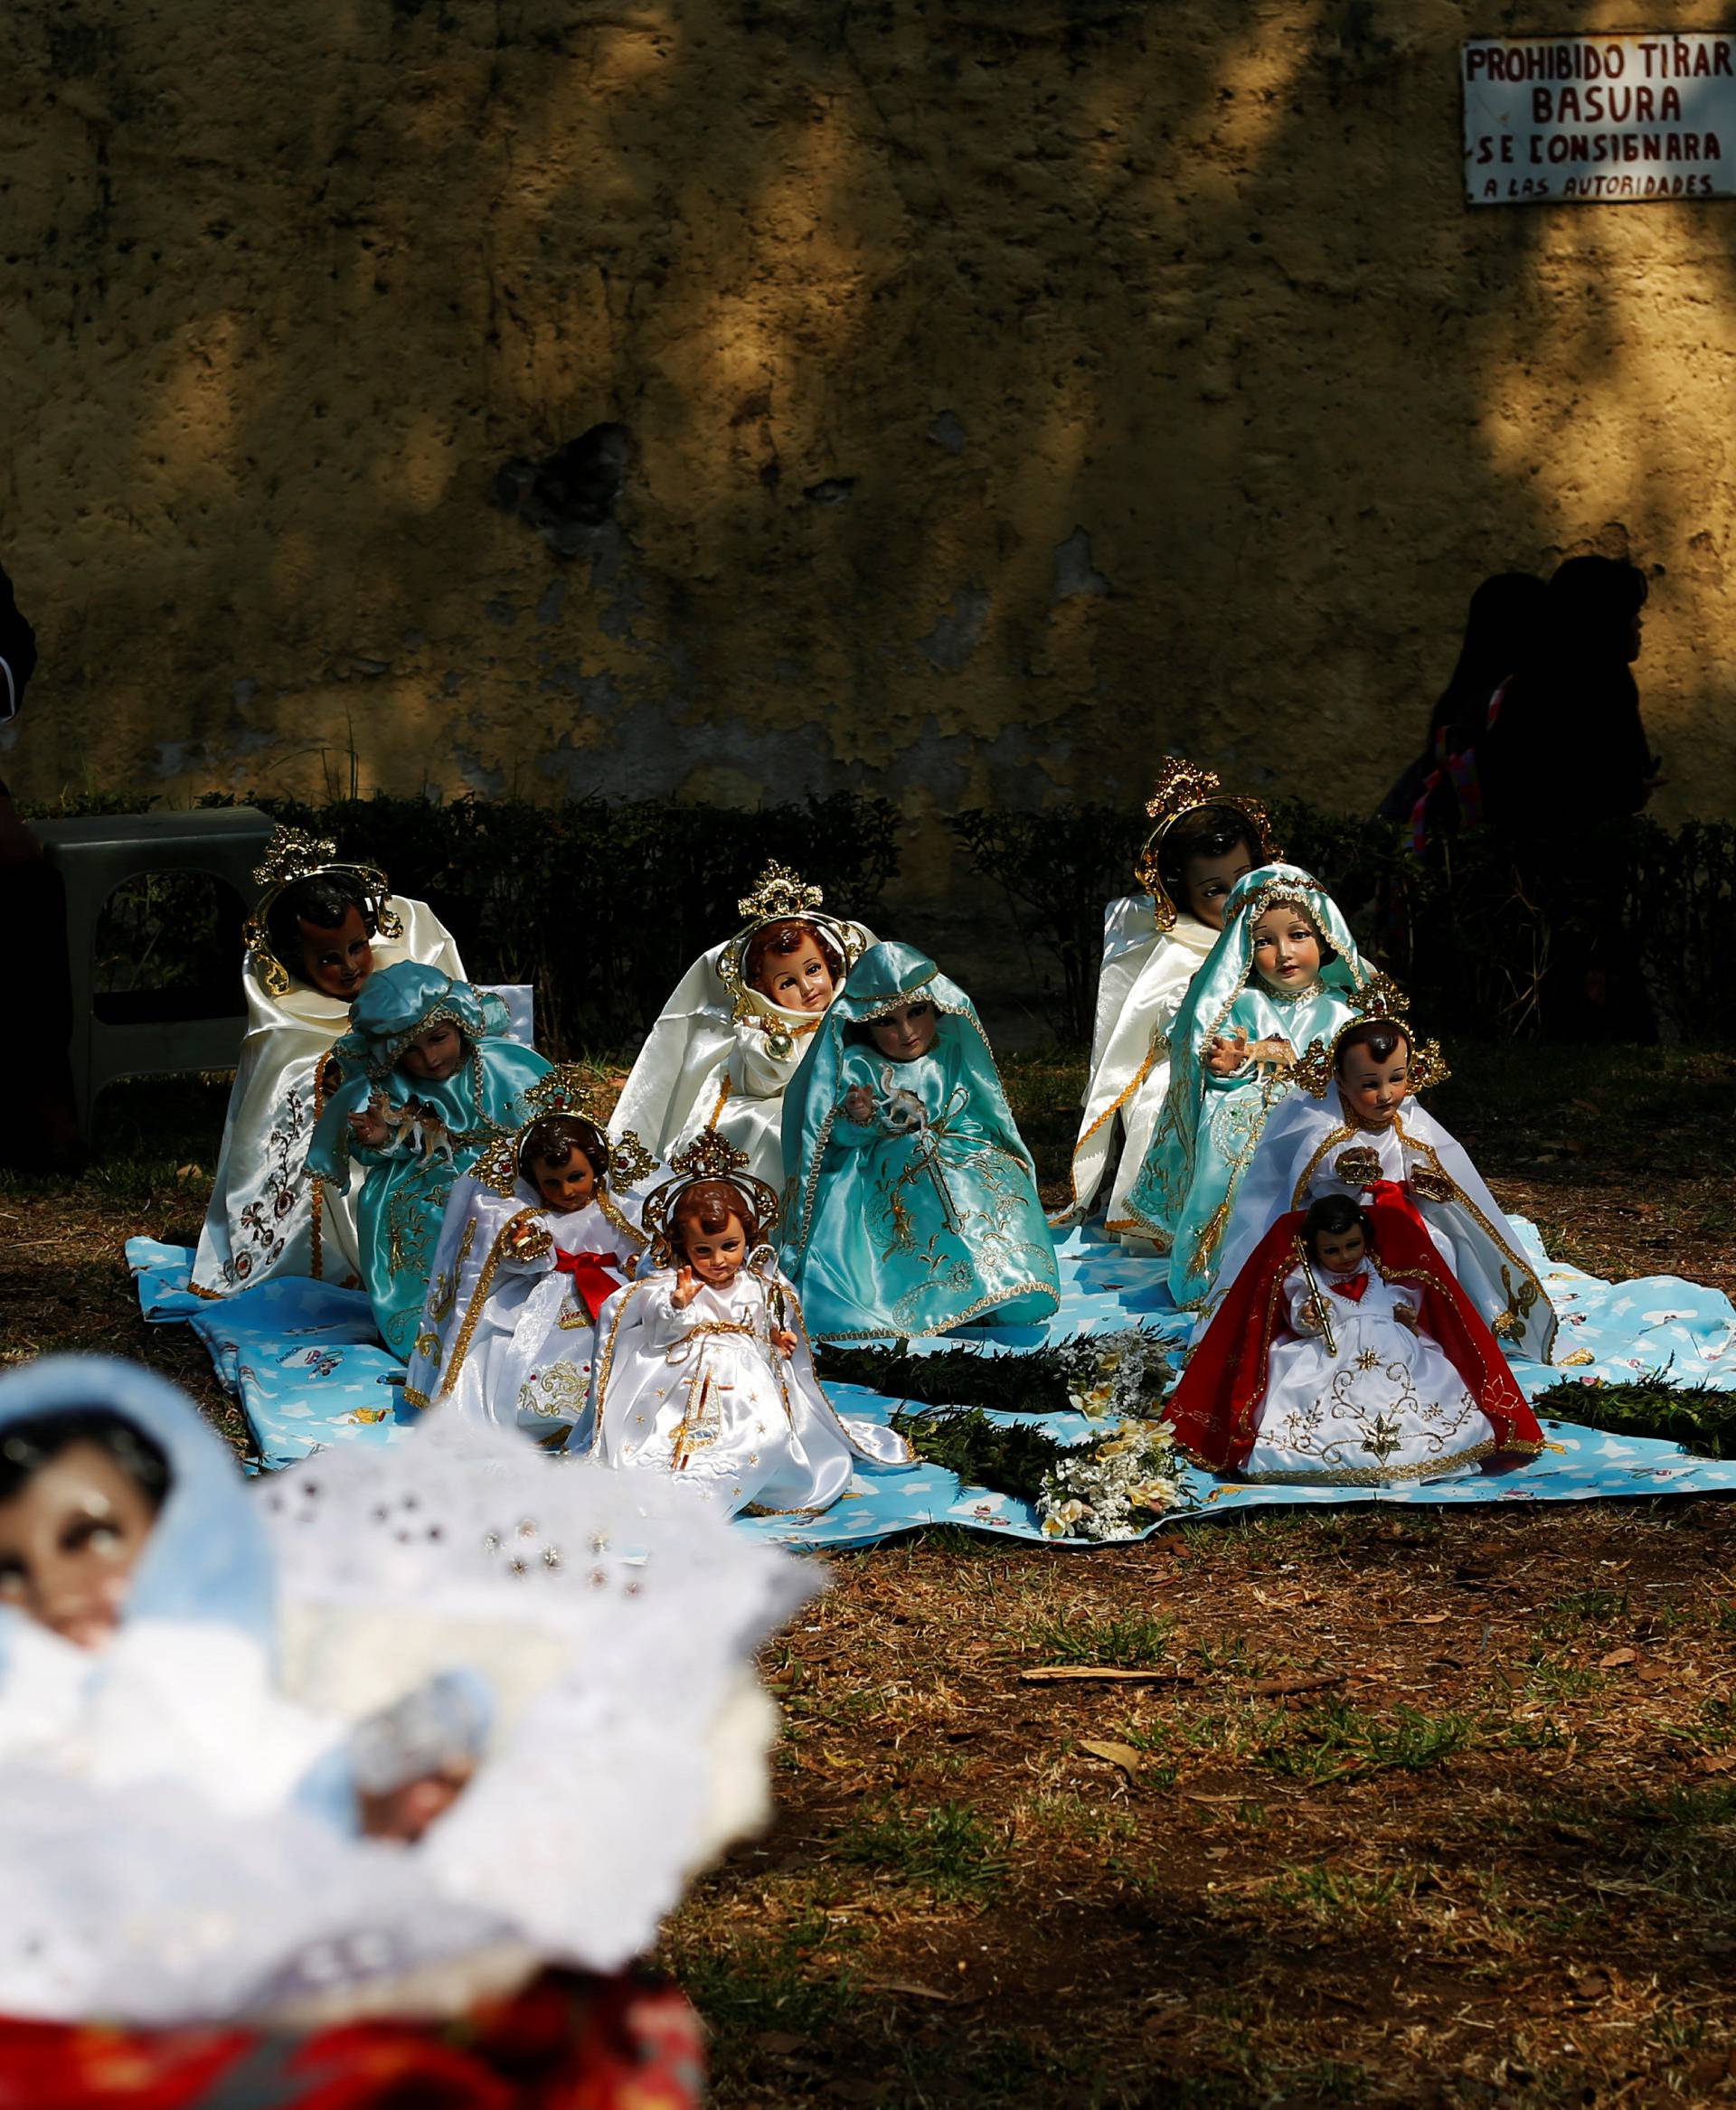 Dressed-up dolls representing baby Jesus are pictured during the annual Feast of Candelaria celebration in Mexico City